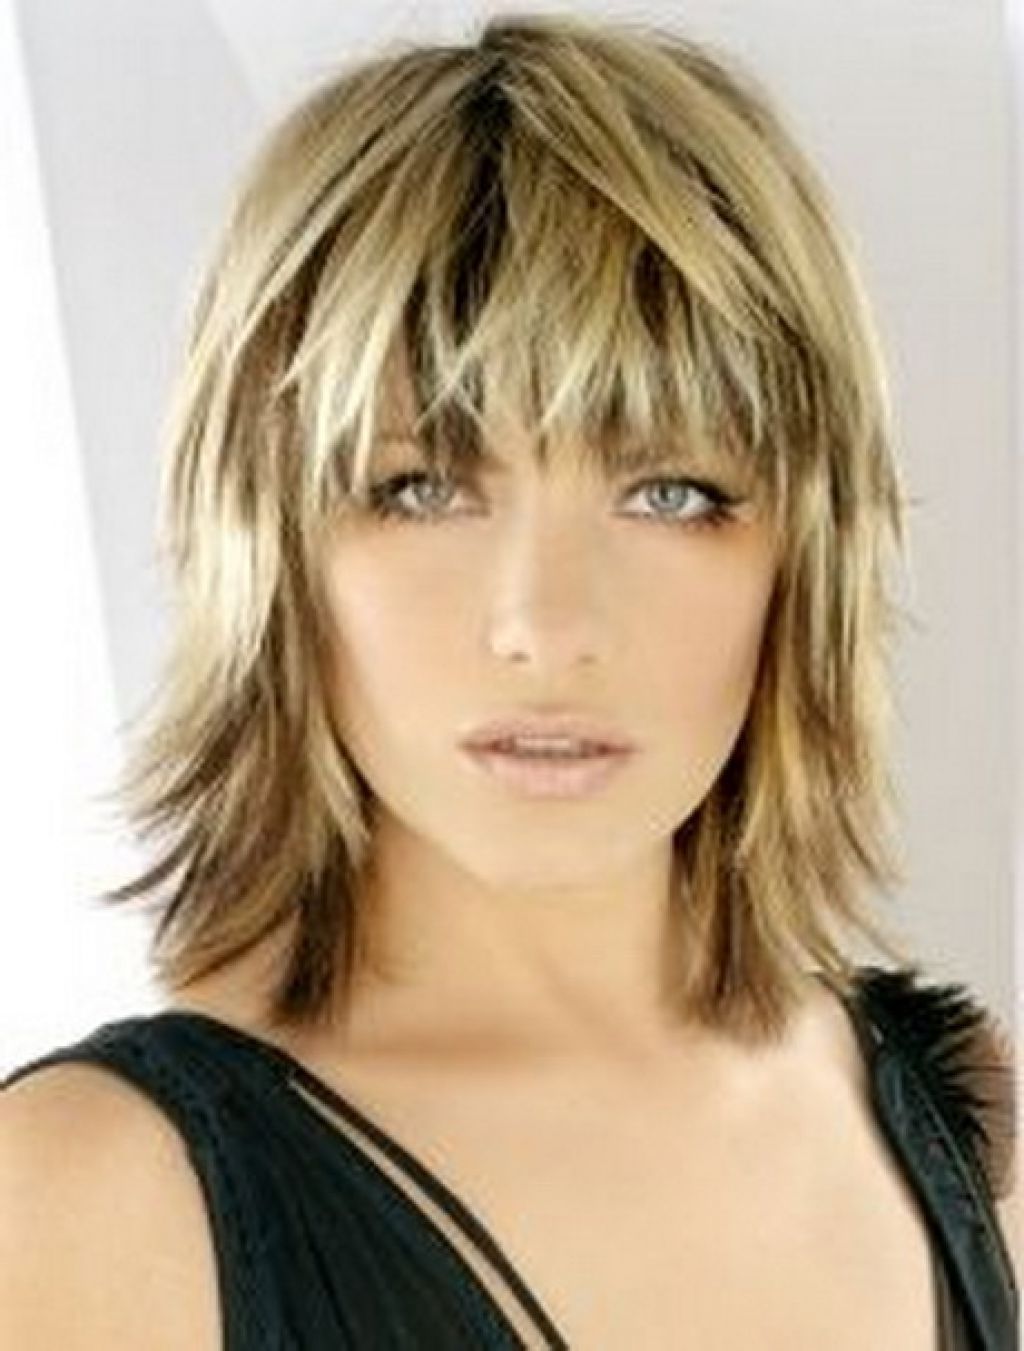 Blonde Medium Length Choppy Shag Haircut With Wispy Bangs And Dark Throughout 2018 Shaggy Wispy Hairstyles (View 1 of 15)